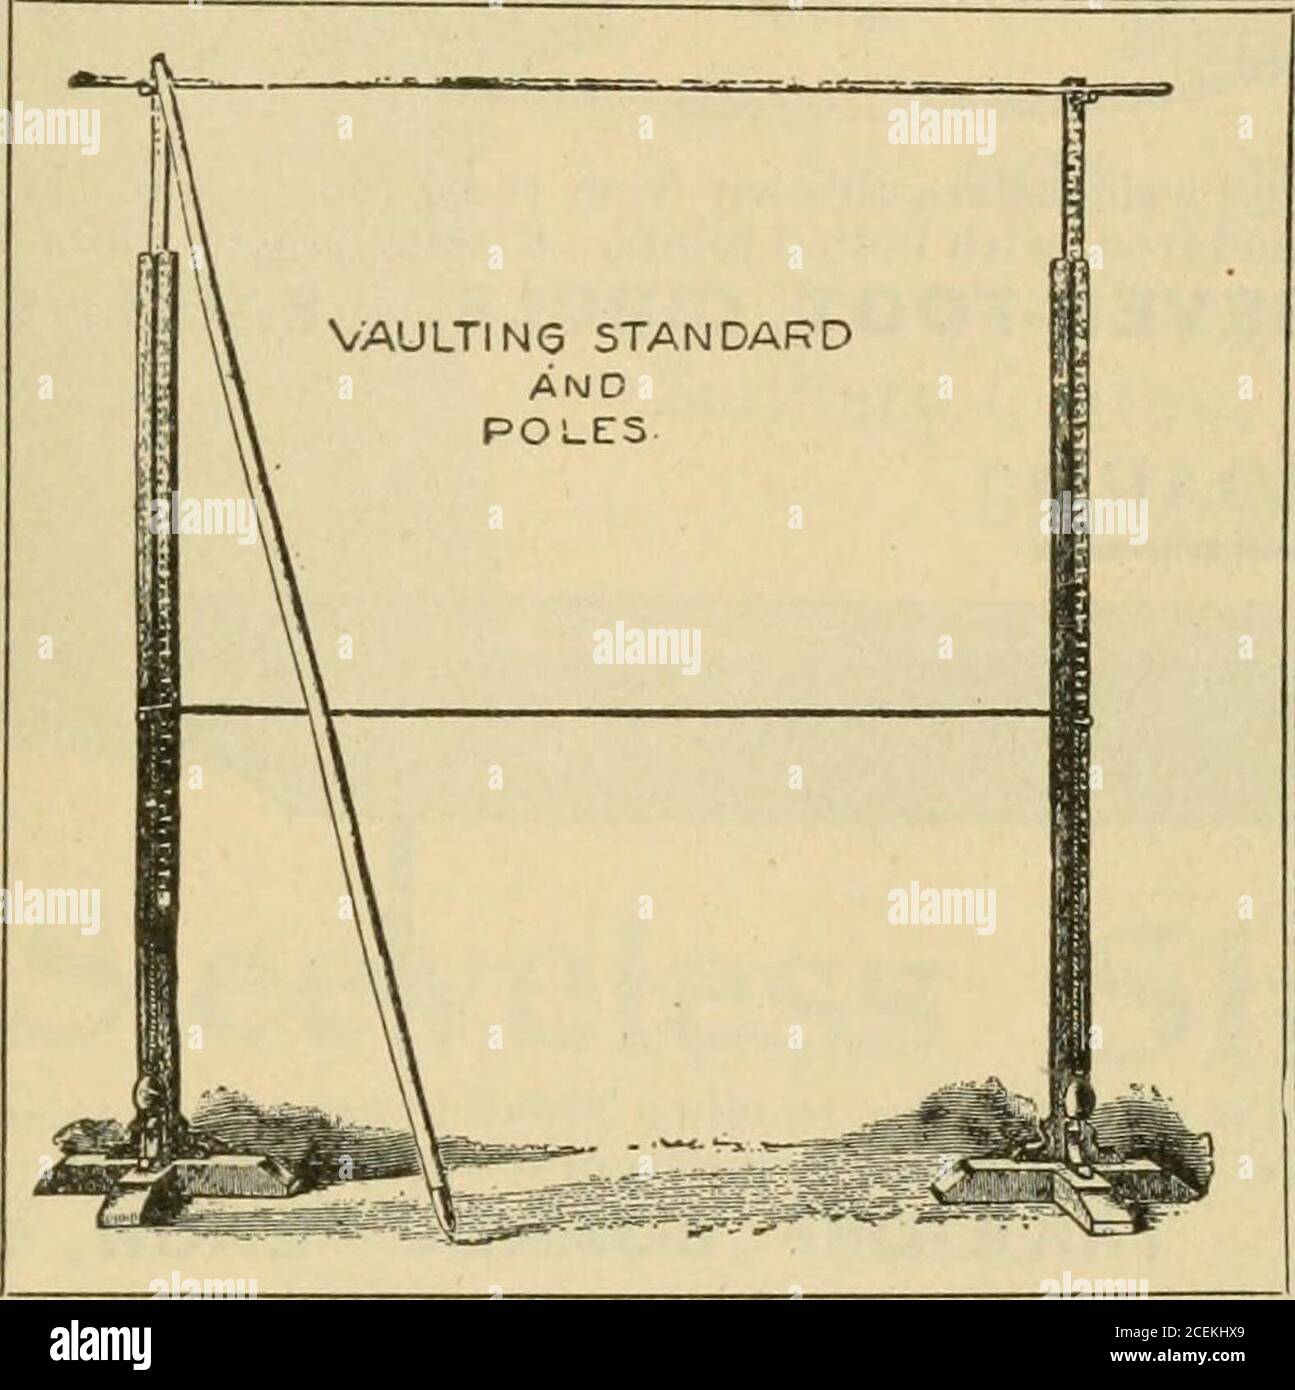 . Spalding's official athletic almanac. The frame is 2 feet 6 inches high, with a horizontalrod passing through it 2 feet above the ground. Thehurdle is a wooden gate 2 feet high, swinging onthis rod at a point 6 inches from one of the sides andi8 inches from the other. With the short side up itmeasures 2 feet 6 inches from the ground, and withthe long side up 3 feet 6 inches. The hurdle can bechanged from one height to the other in a fewseconds, and is held firmly in either position by athumb-screw on the rod. It would be hard to con-ceive any device more simple or more easily handledthan thi Stock Photo